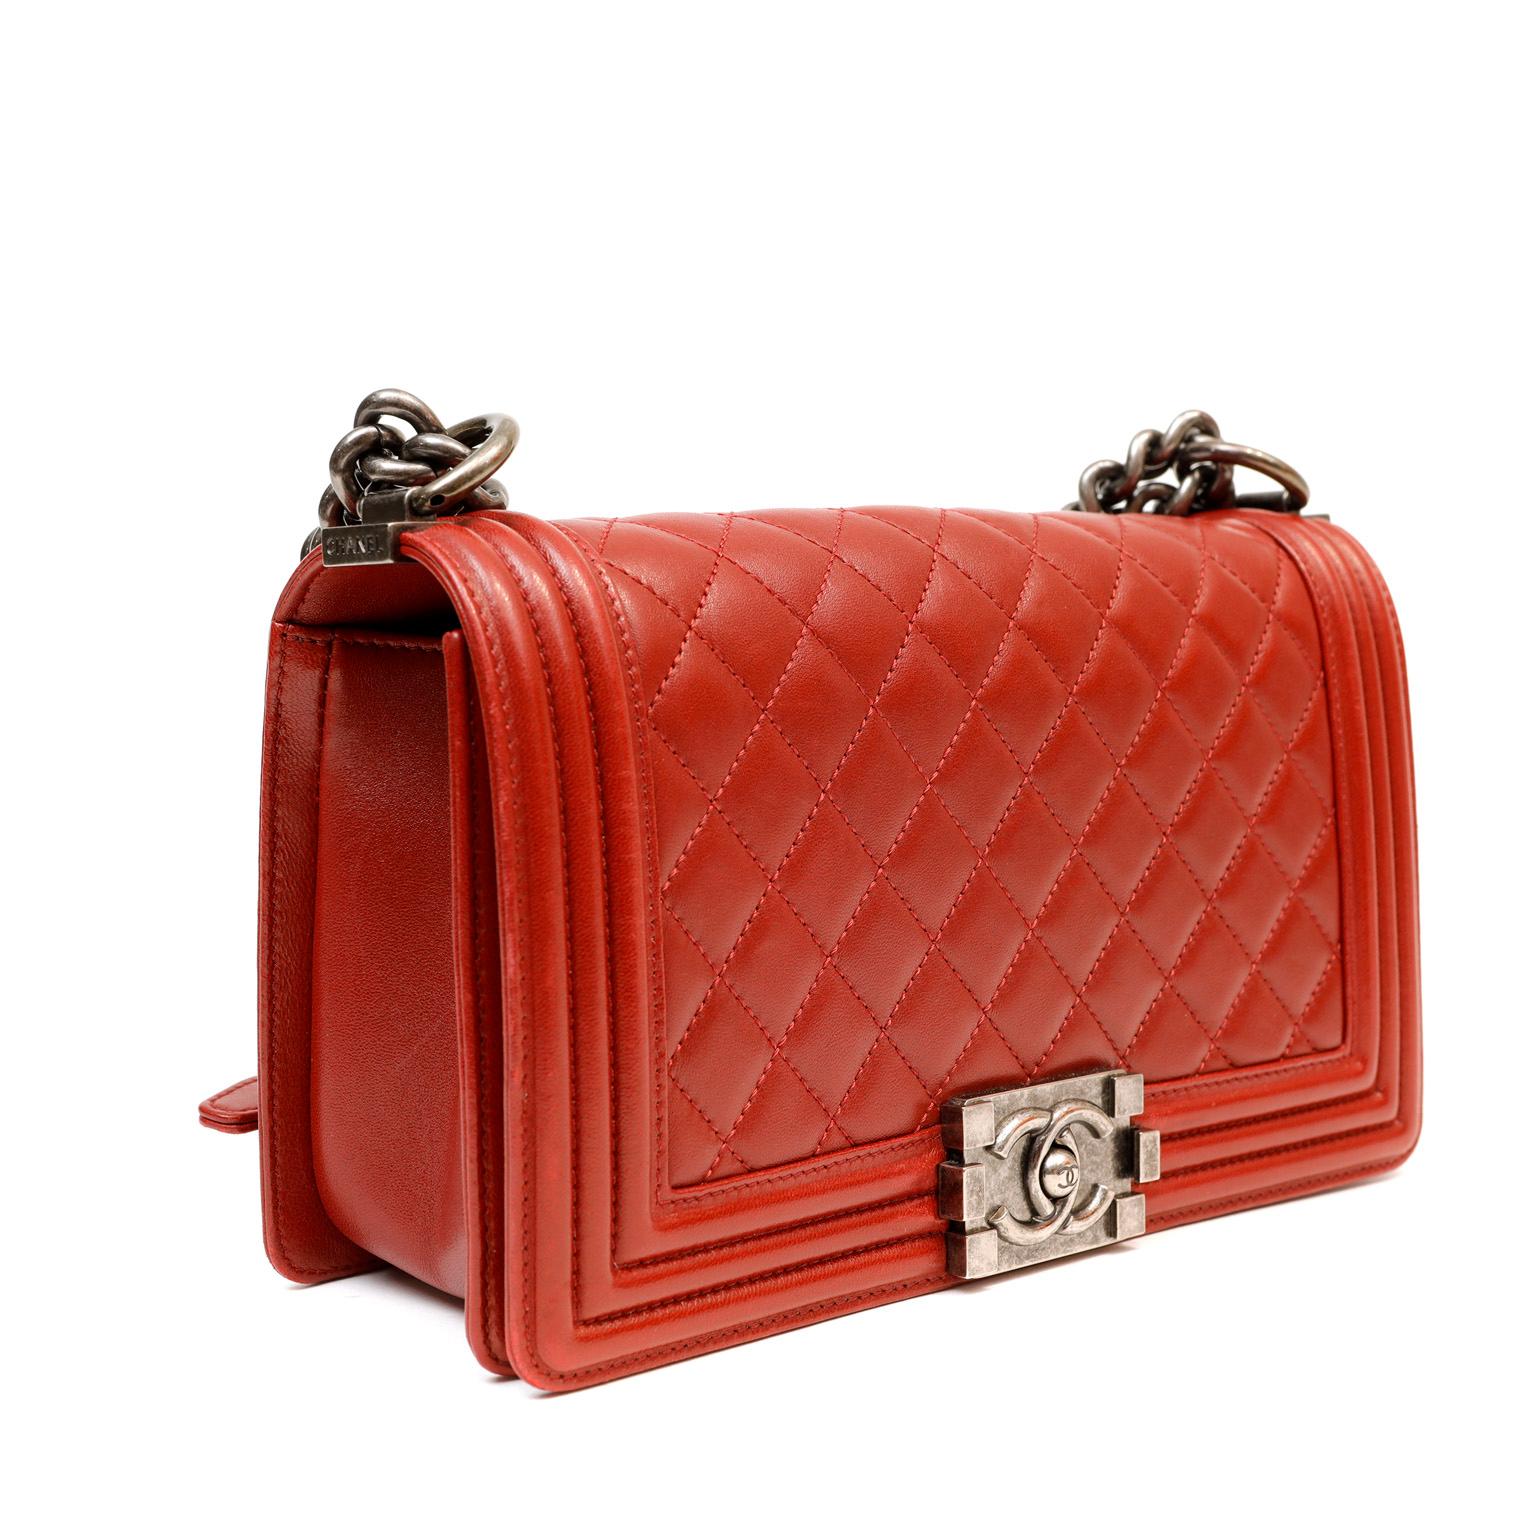 This authentic Chanel Red Calfskin Boy Bag is in pristine condition.  The updated design is structured and edgy with a versatility that makes it extremely popular.  True red calfskin is quilted in signature Chanel diamond stitched pattern.  Boy Bag